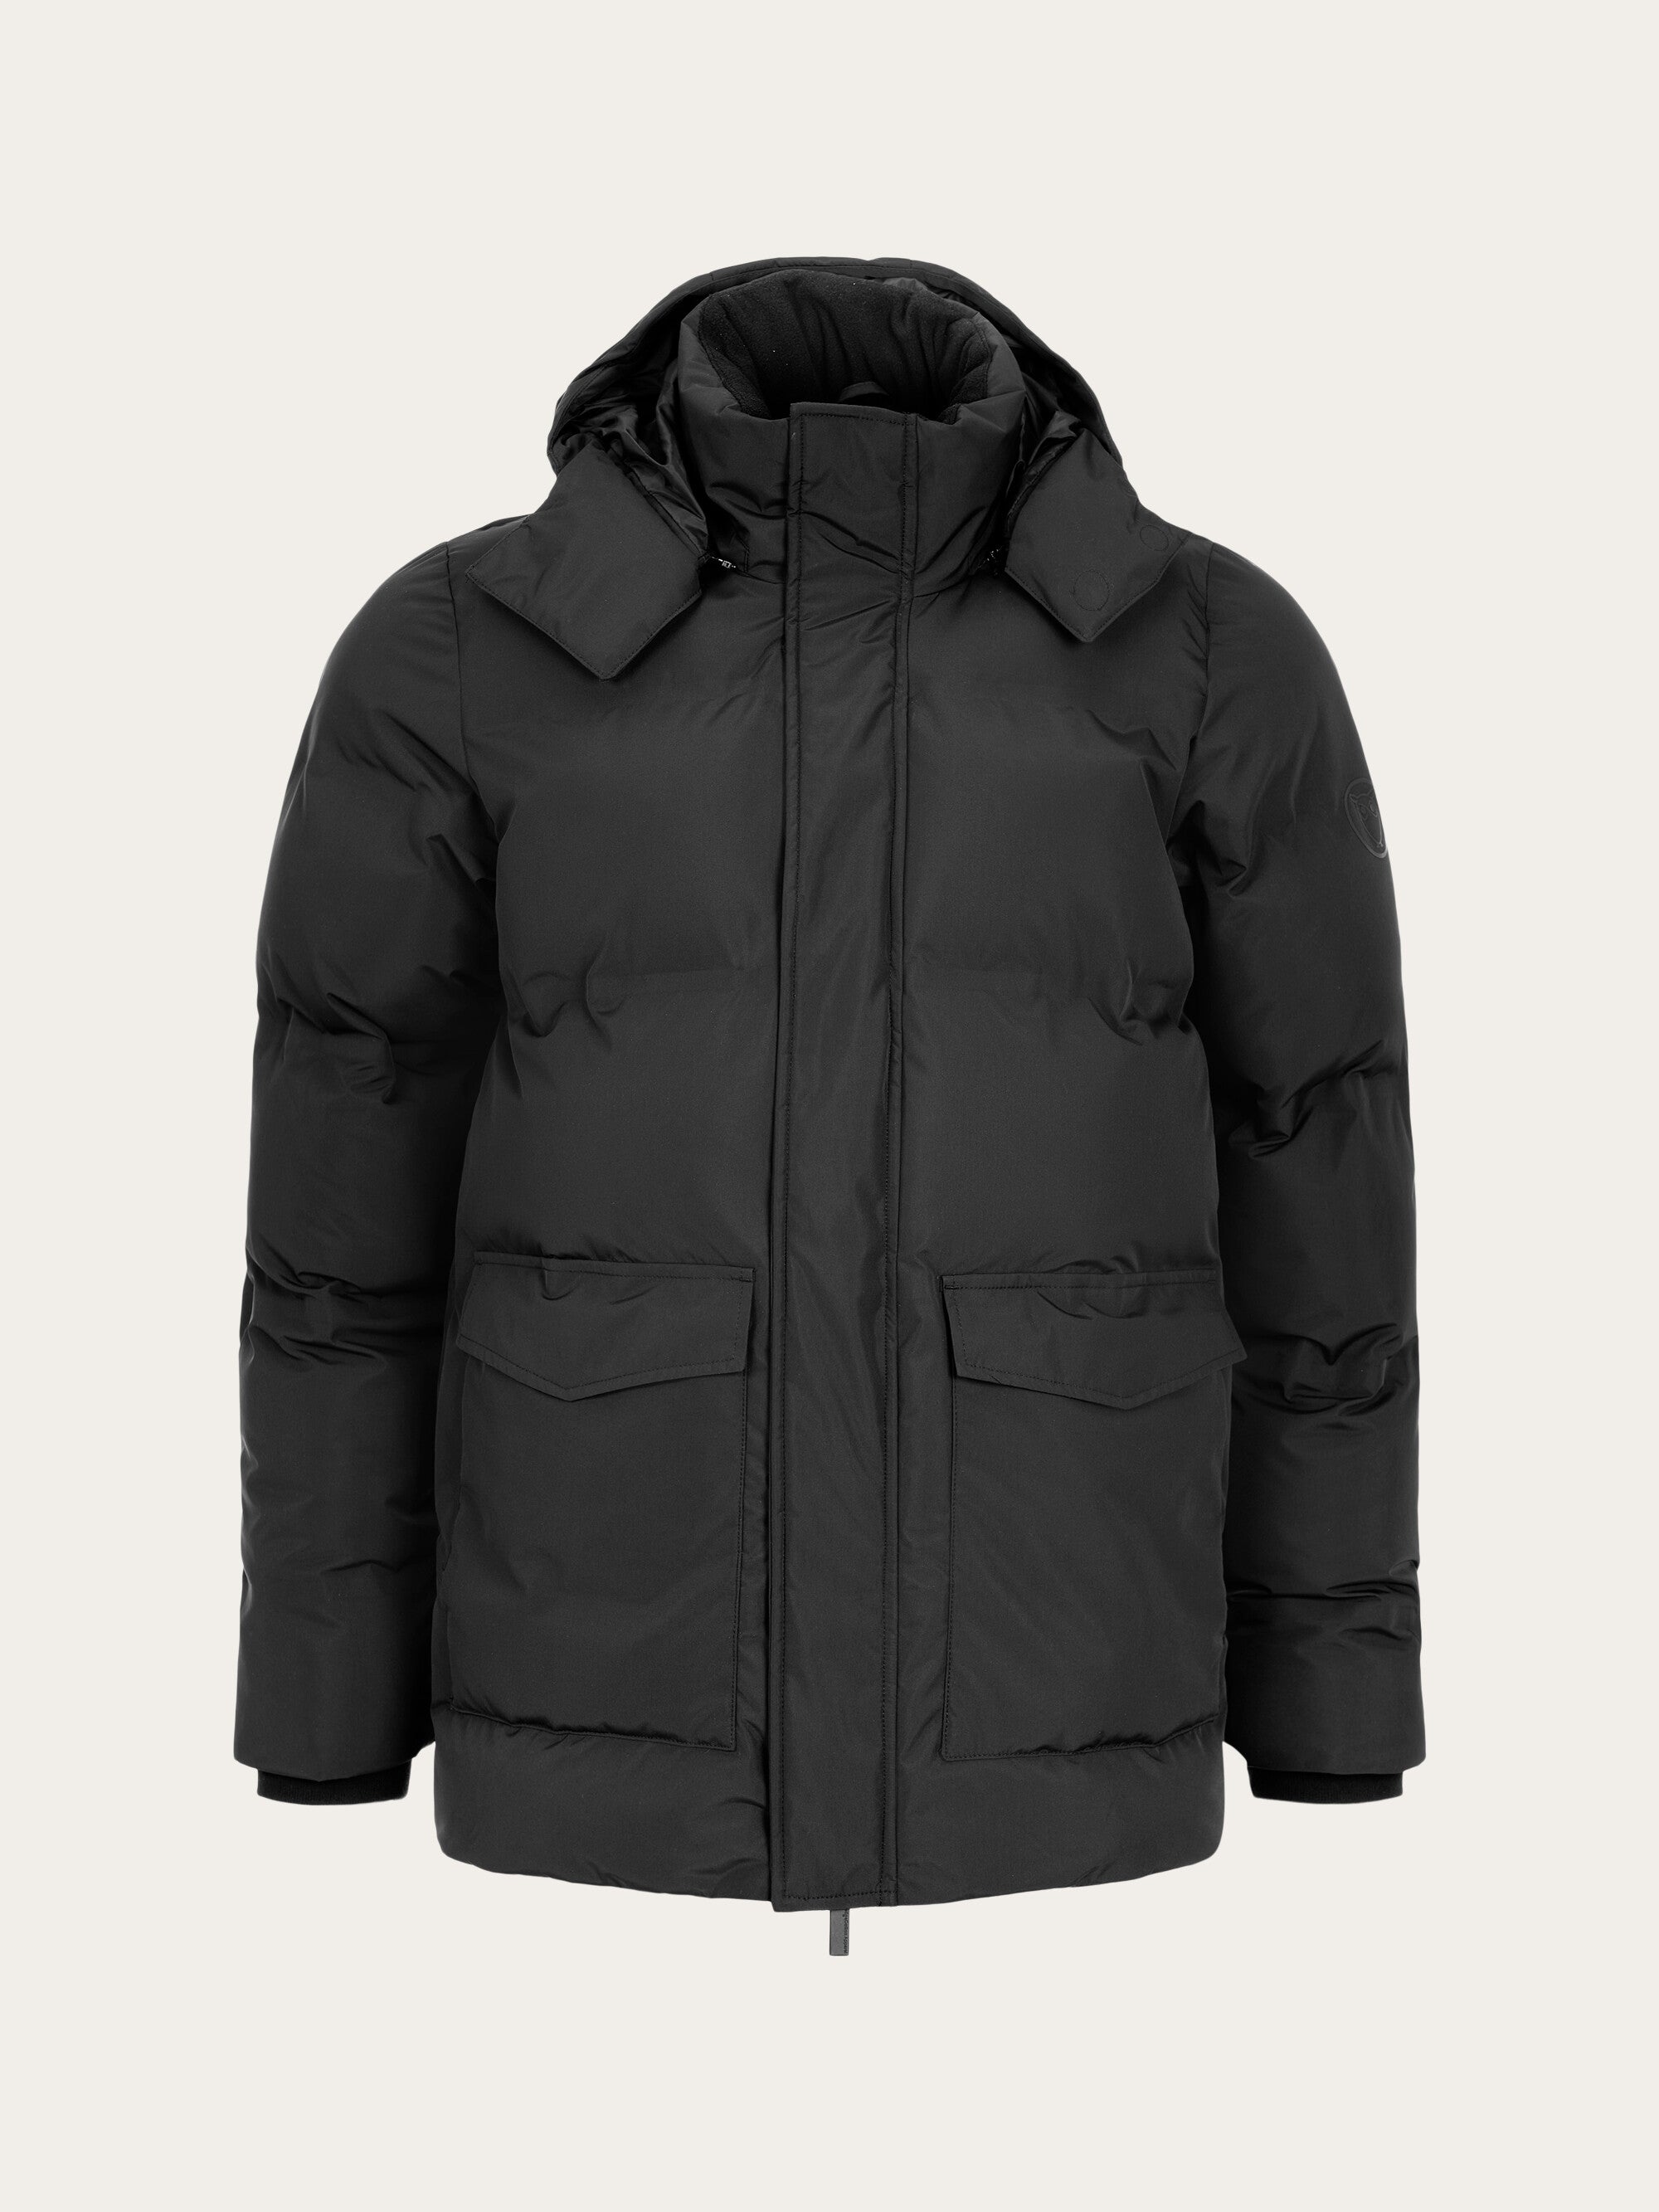 Get the Top Quality Black Reflective Mens Puffer Jacket Online – Kadle